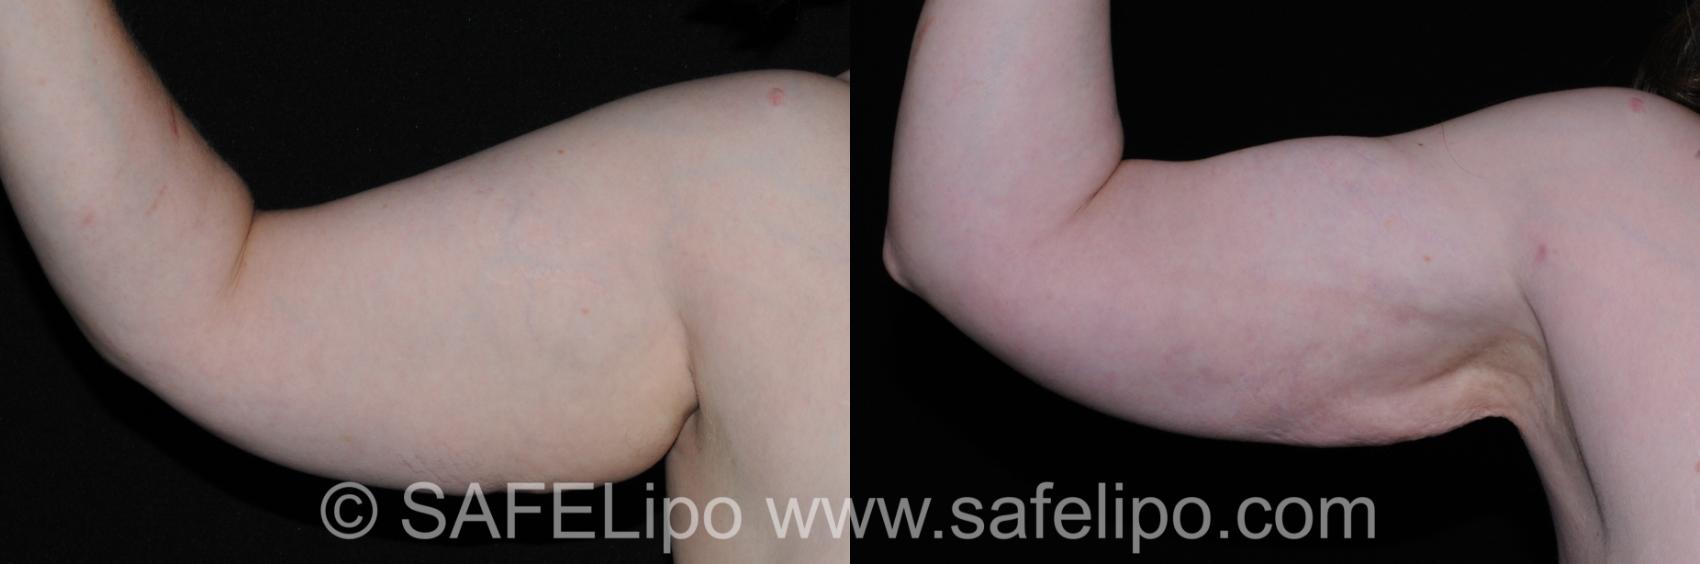 SAFELipo Front Right Photo, Shreveport, Louisiana, The Wall Center for Plastic Surgery, Case 297